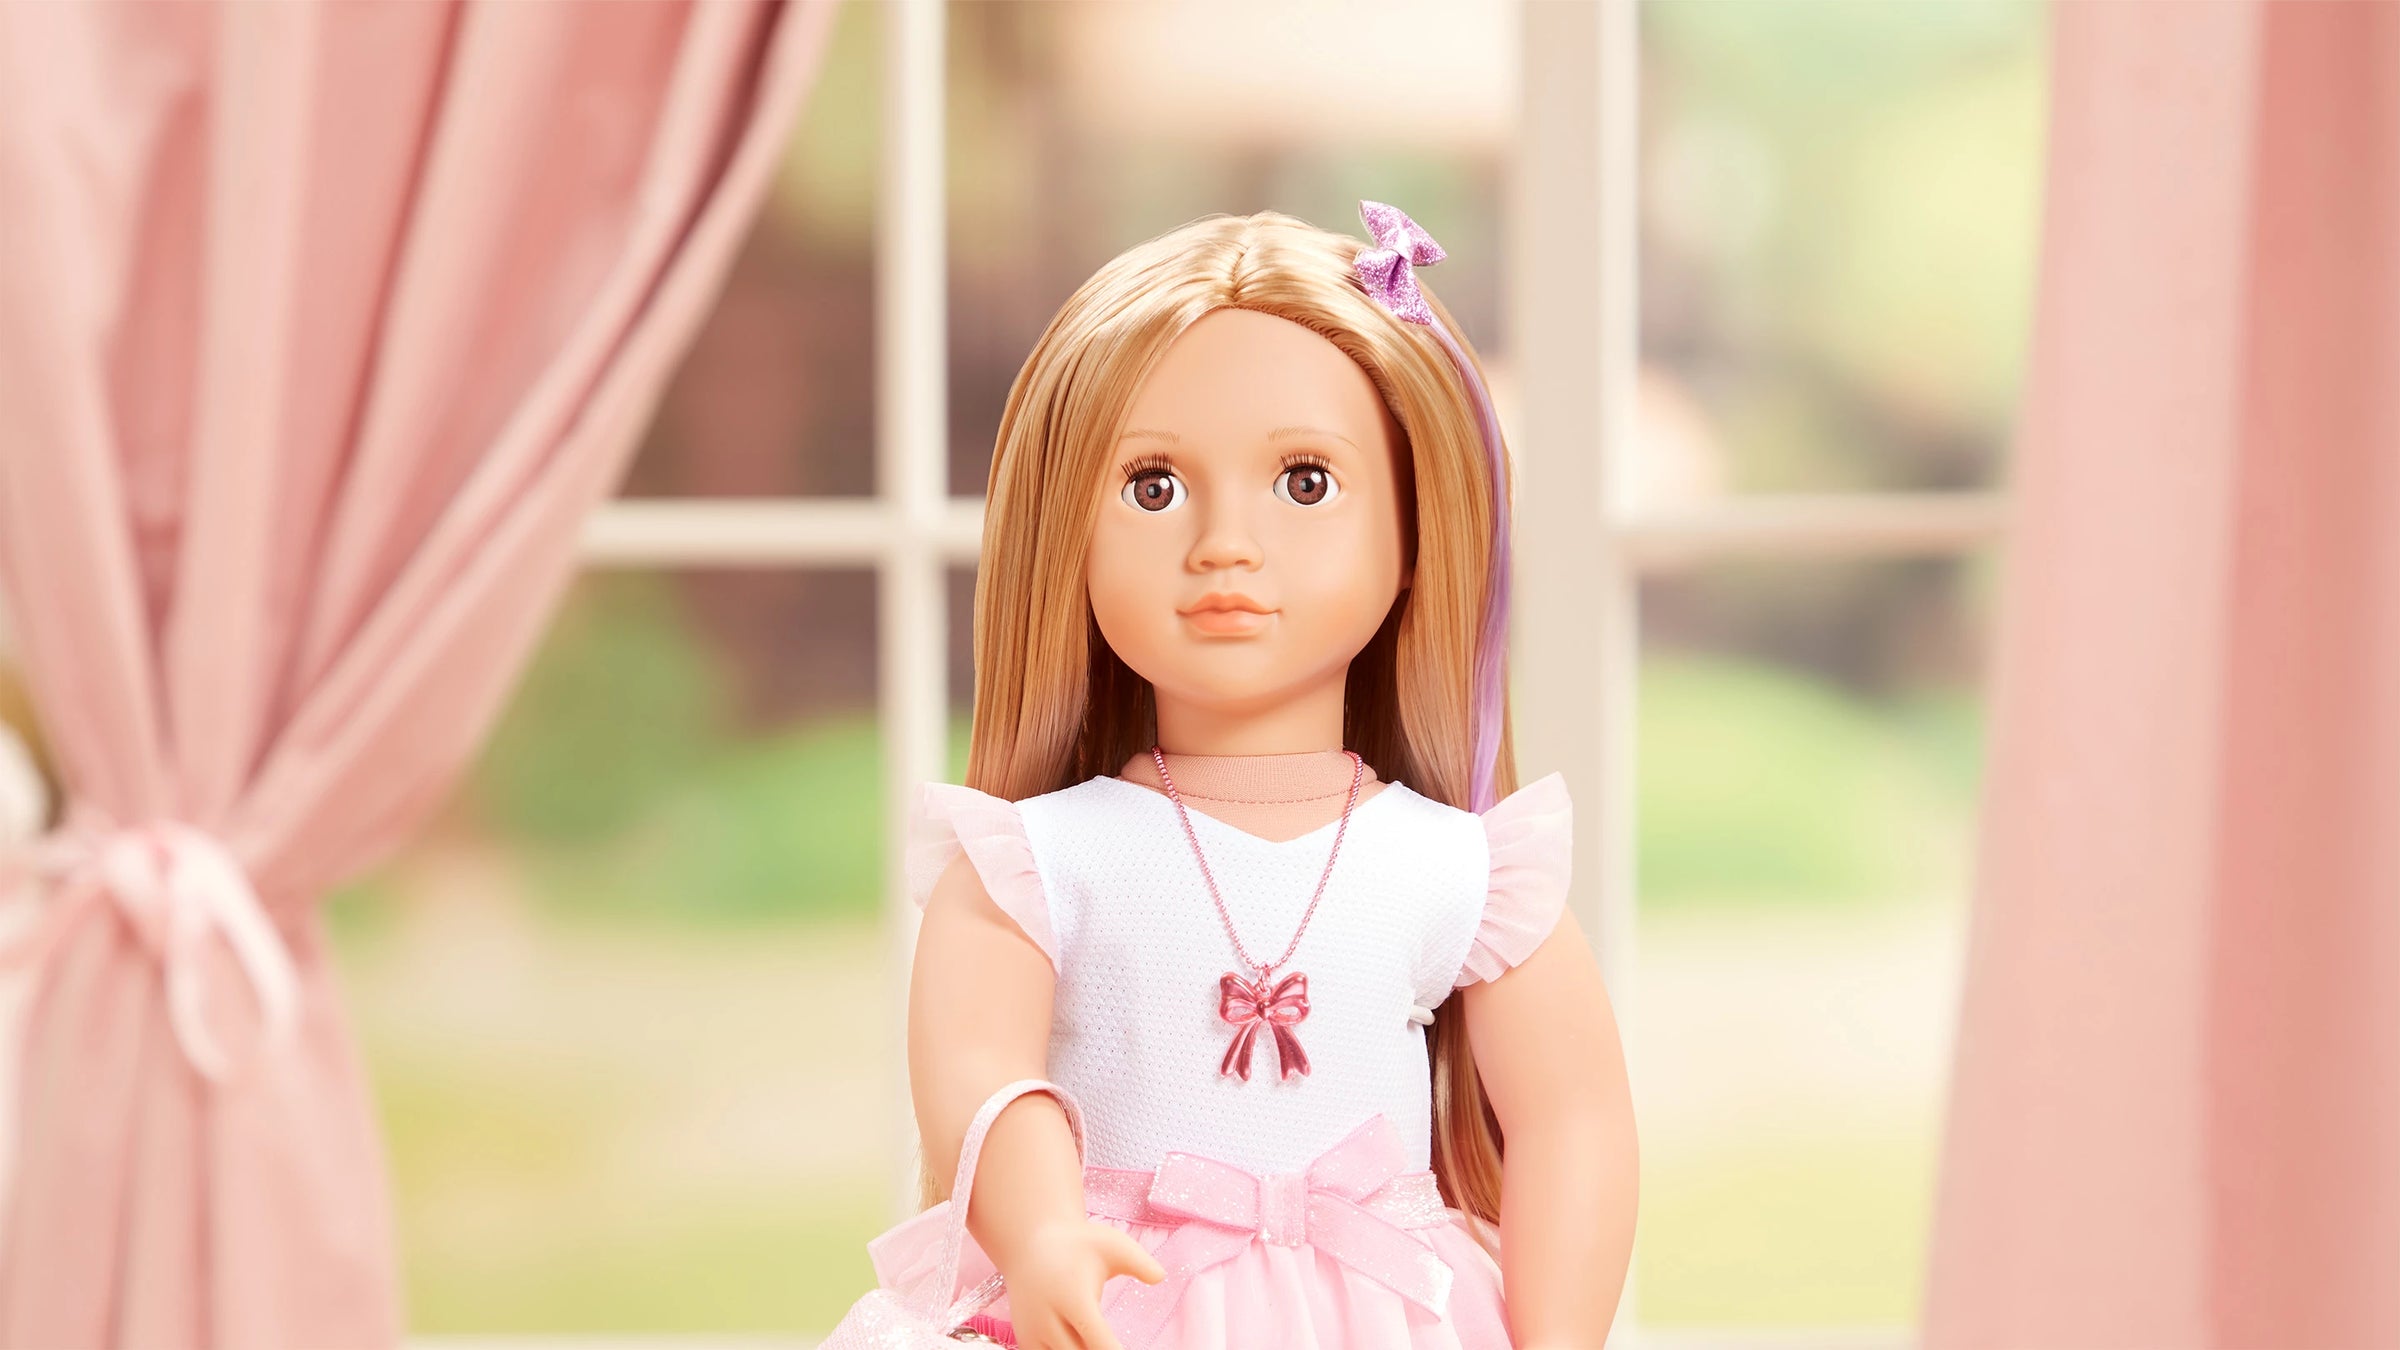 Fashion Accessories - Hair Accessories, Shoes for 46cm Dolls - Doll Accessory - Our Generation UK